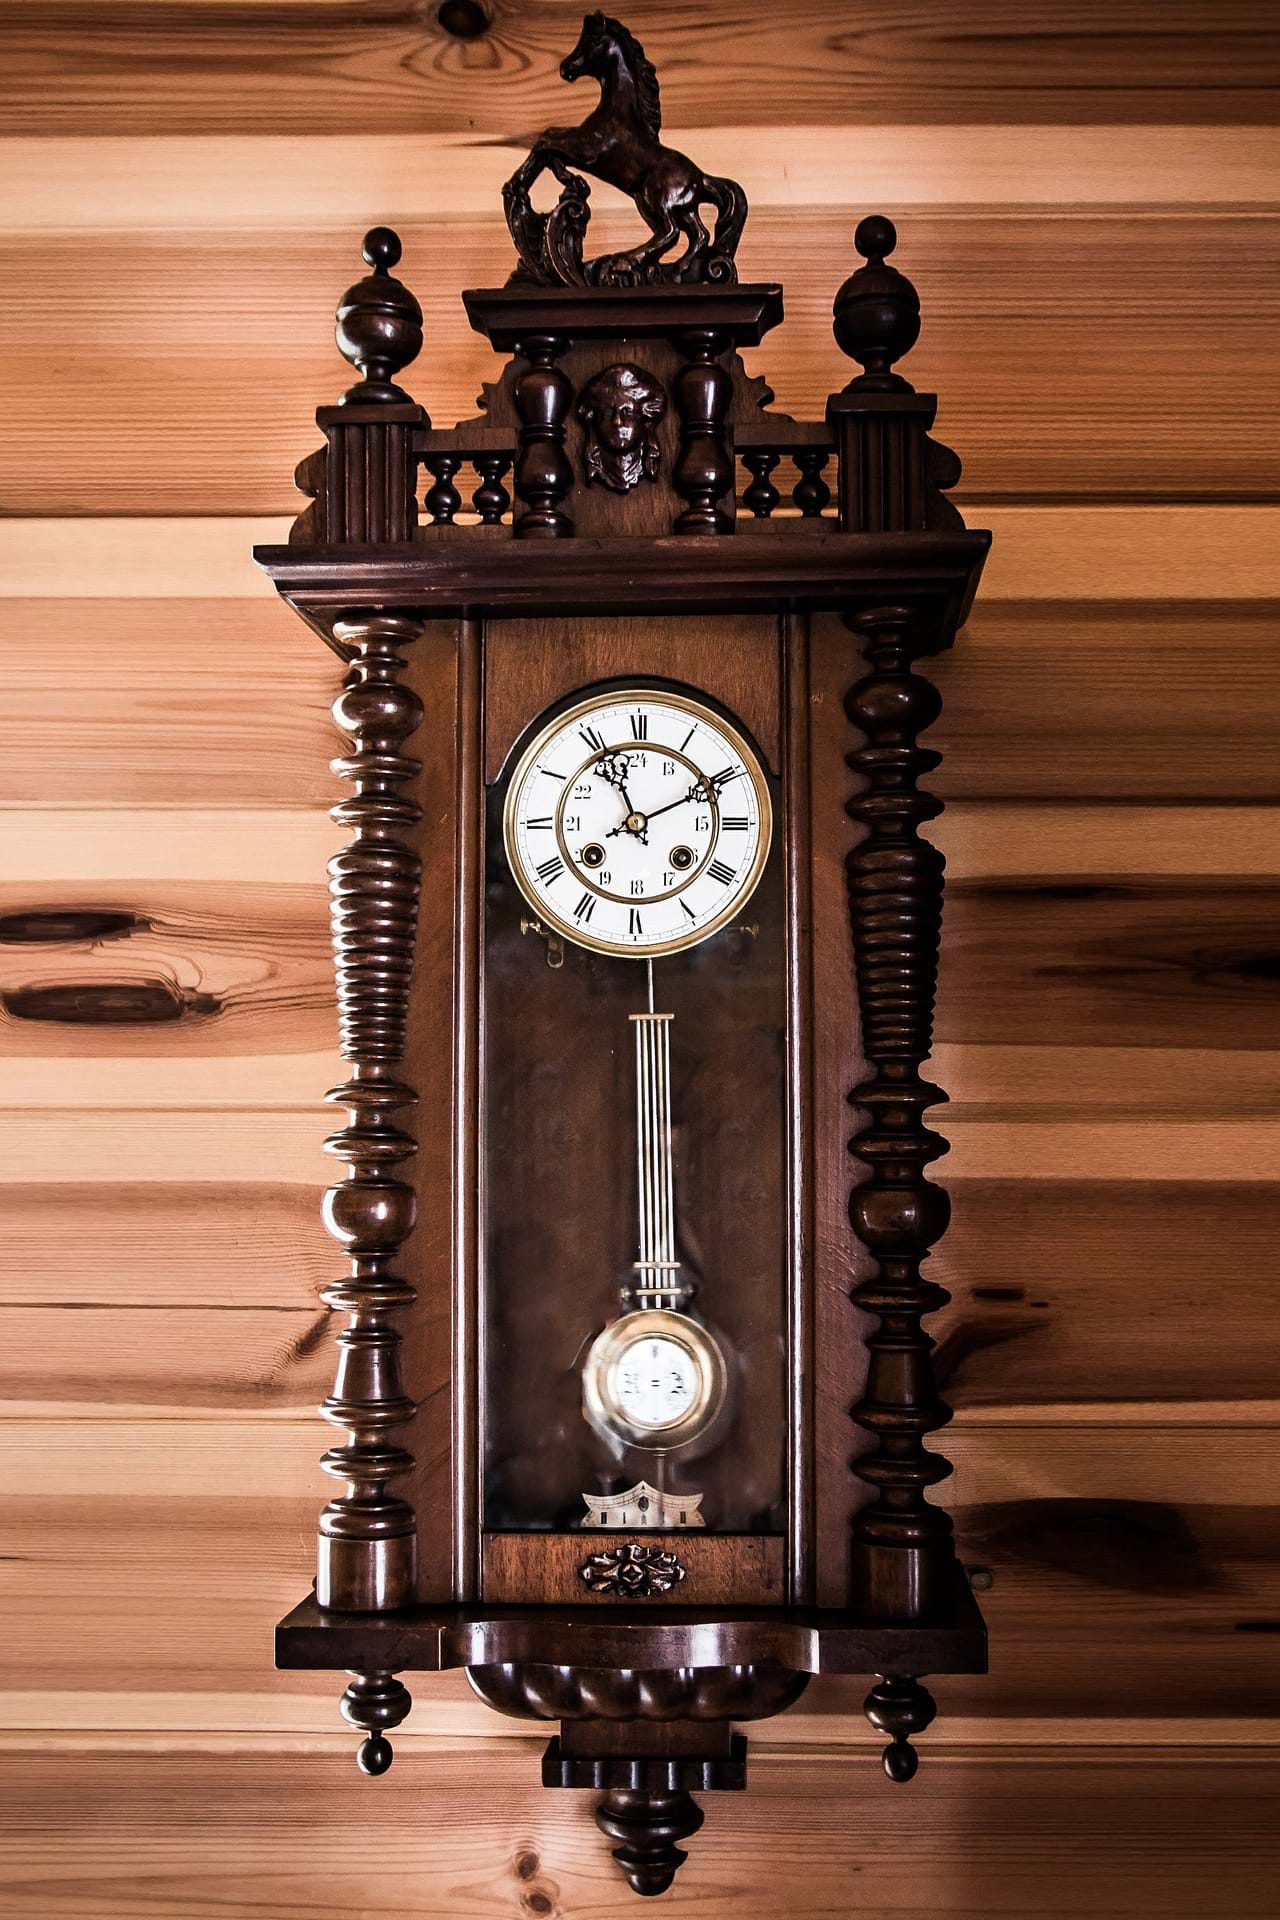 A wooden clock with a pendulum